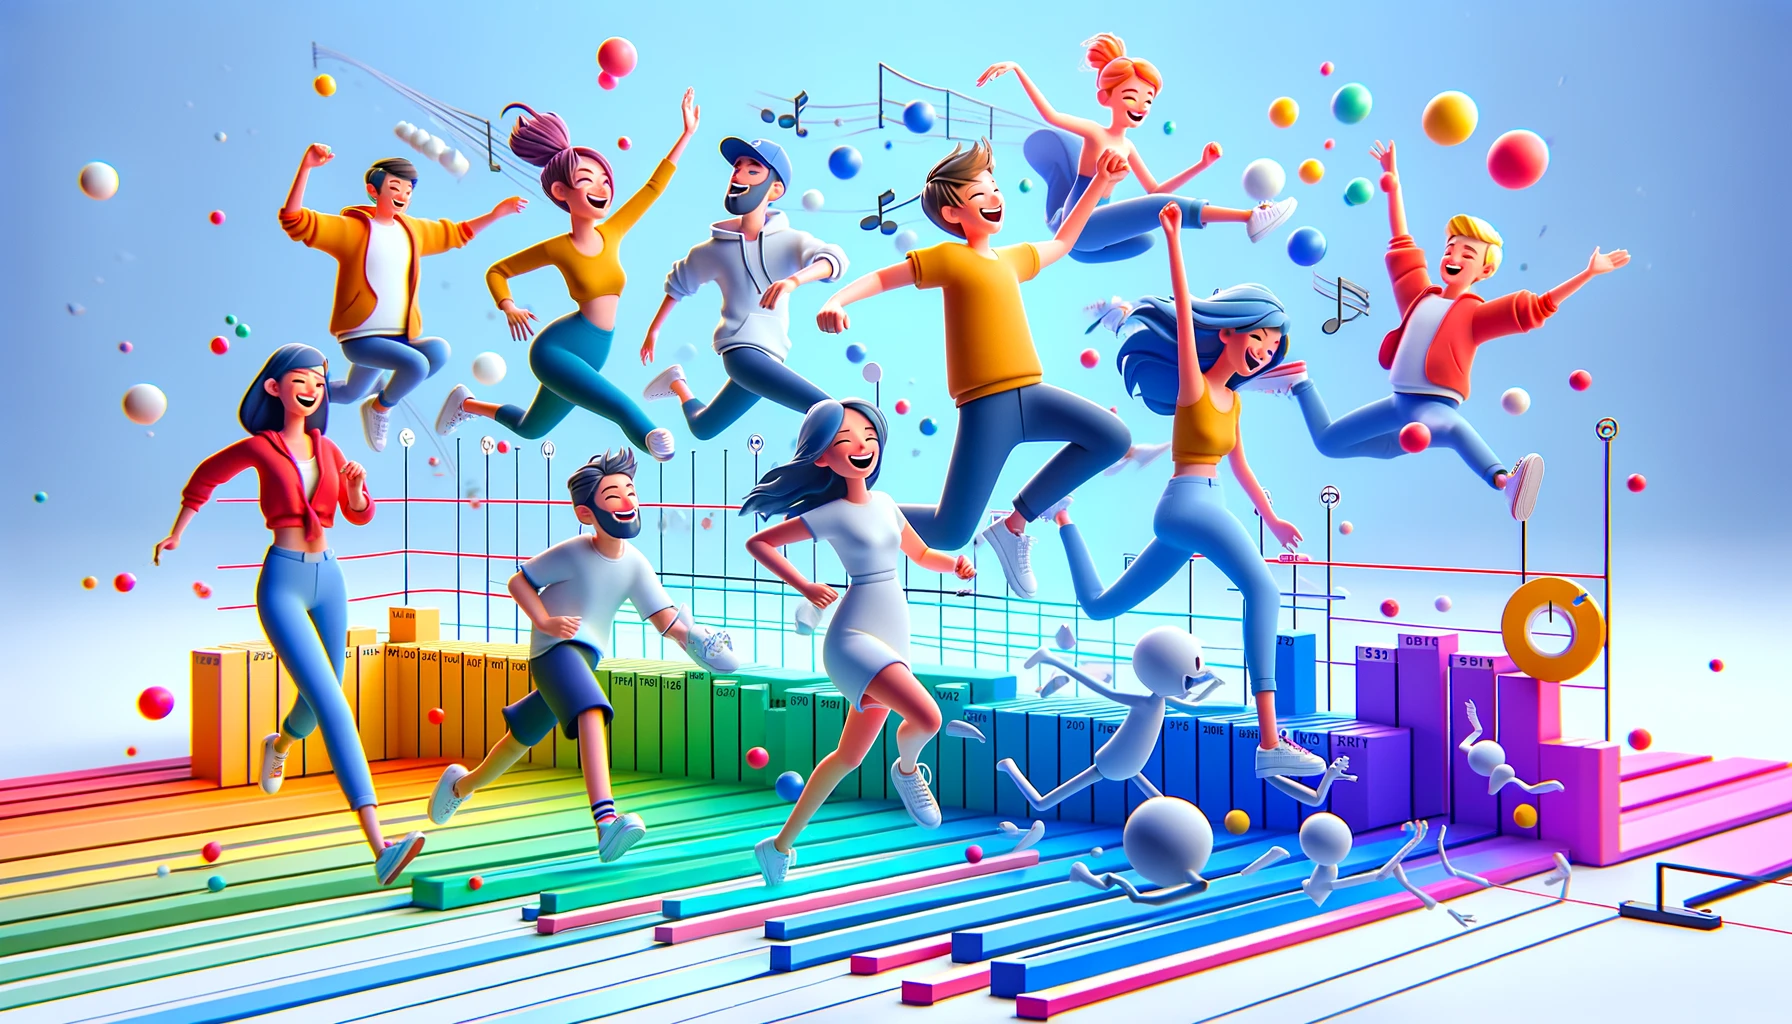 Animated 3D characters in various dynamic poses and emotions, set against a colorful backdrop with timeline bars and keyframe markers, showcasing the lively transition from static to animated forms.